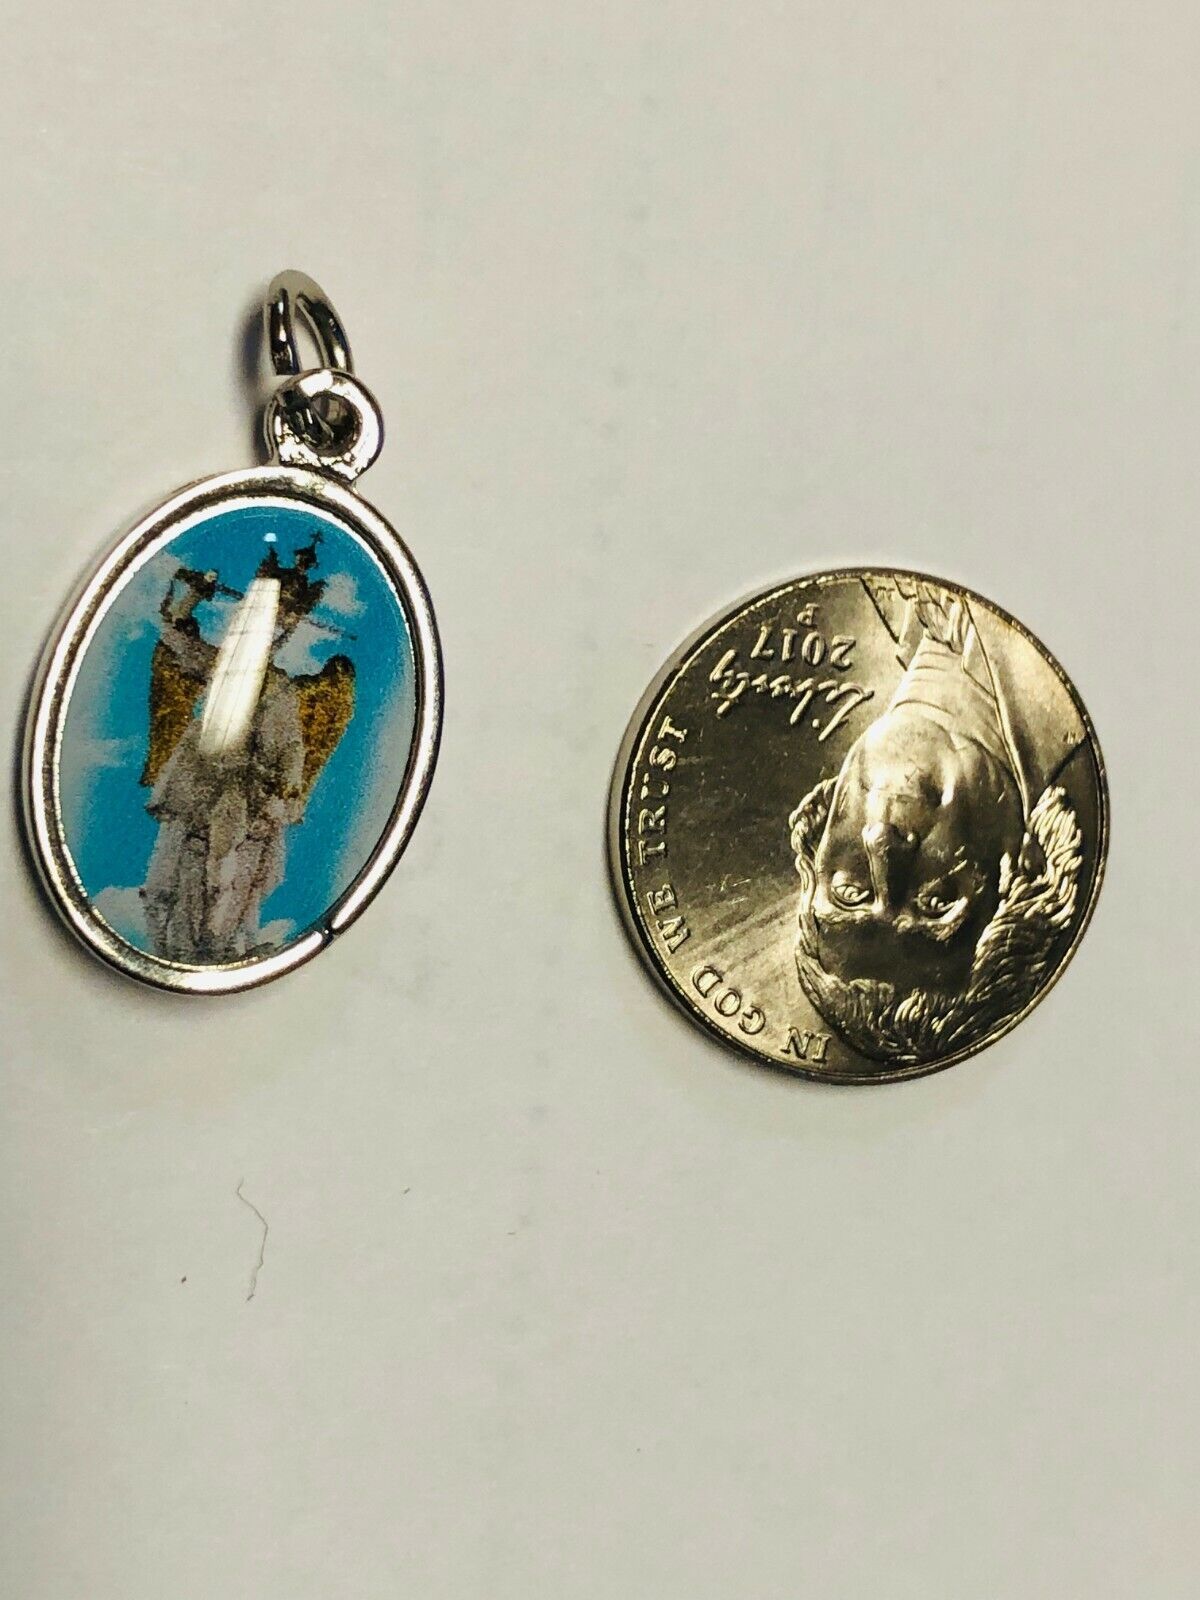 Saint Michael the Archangel/Guardian Angel, 2 sided  Medal, New from Italy - Bob and Penny Lord